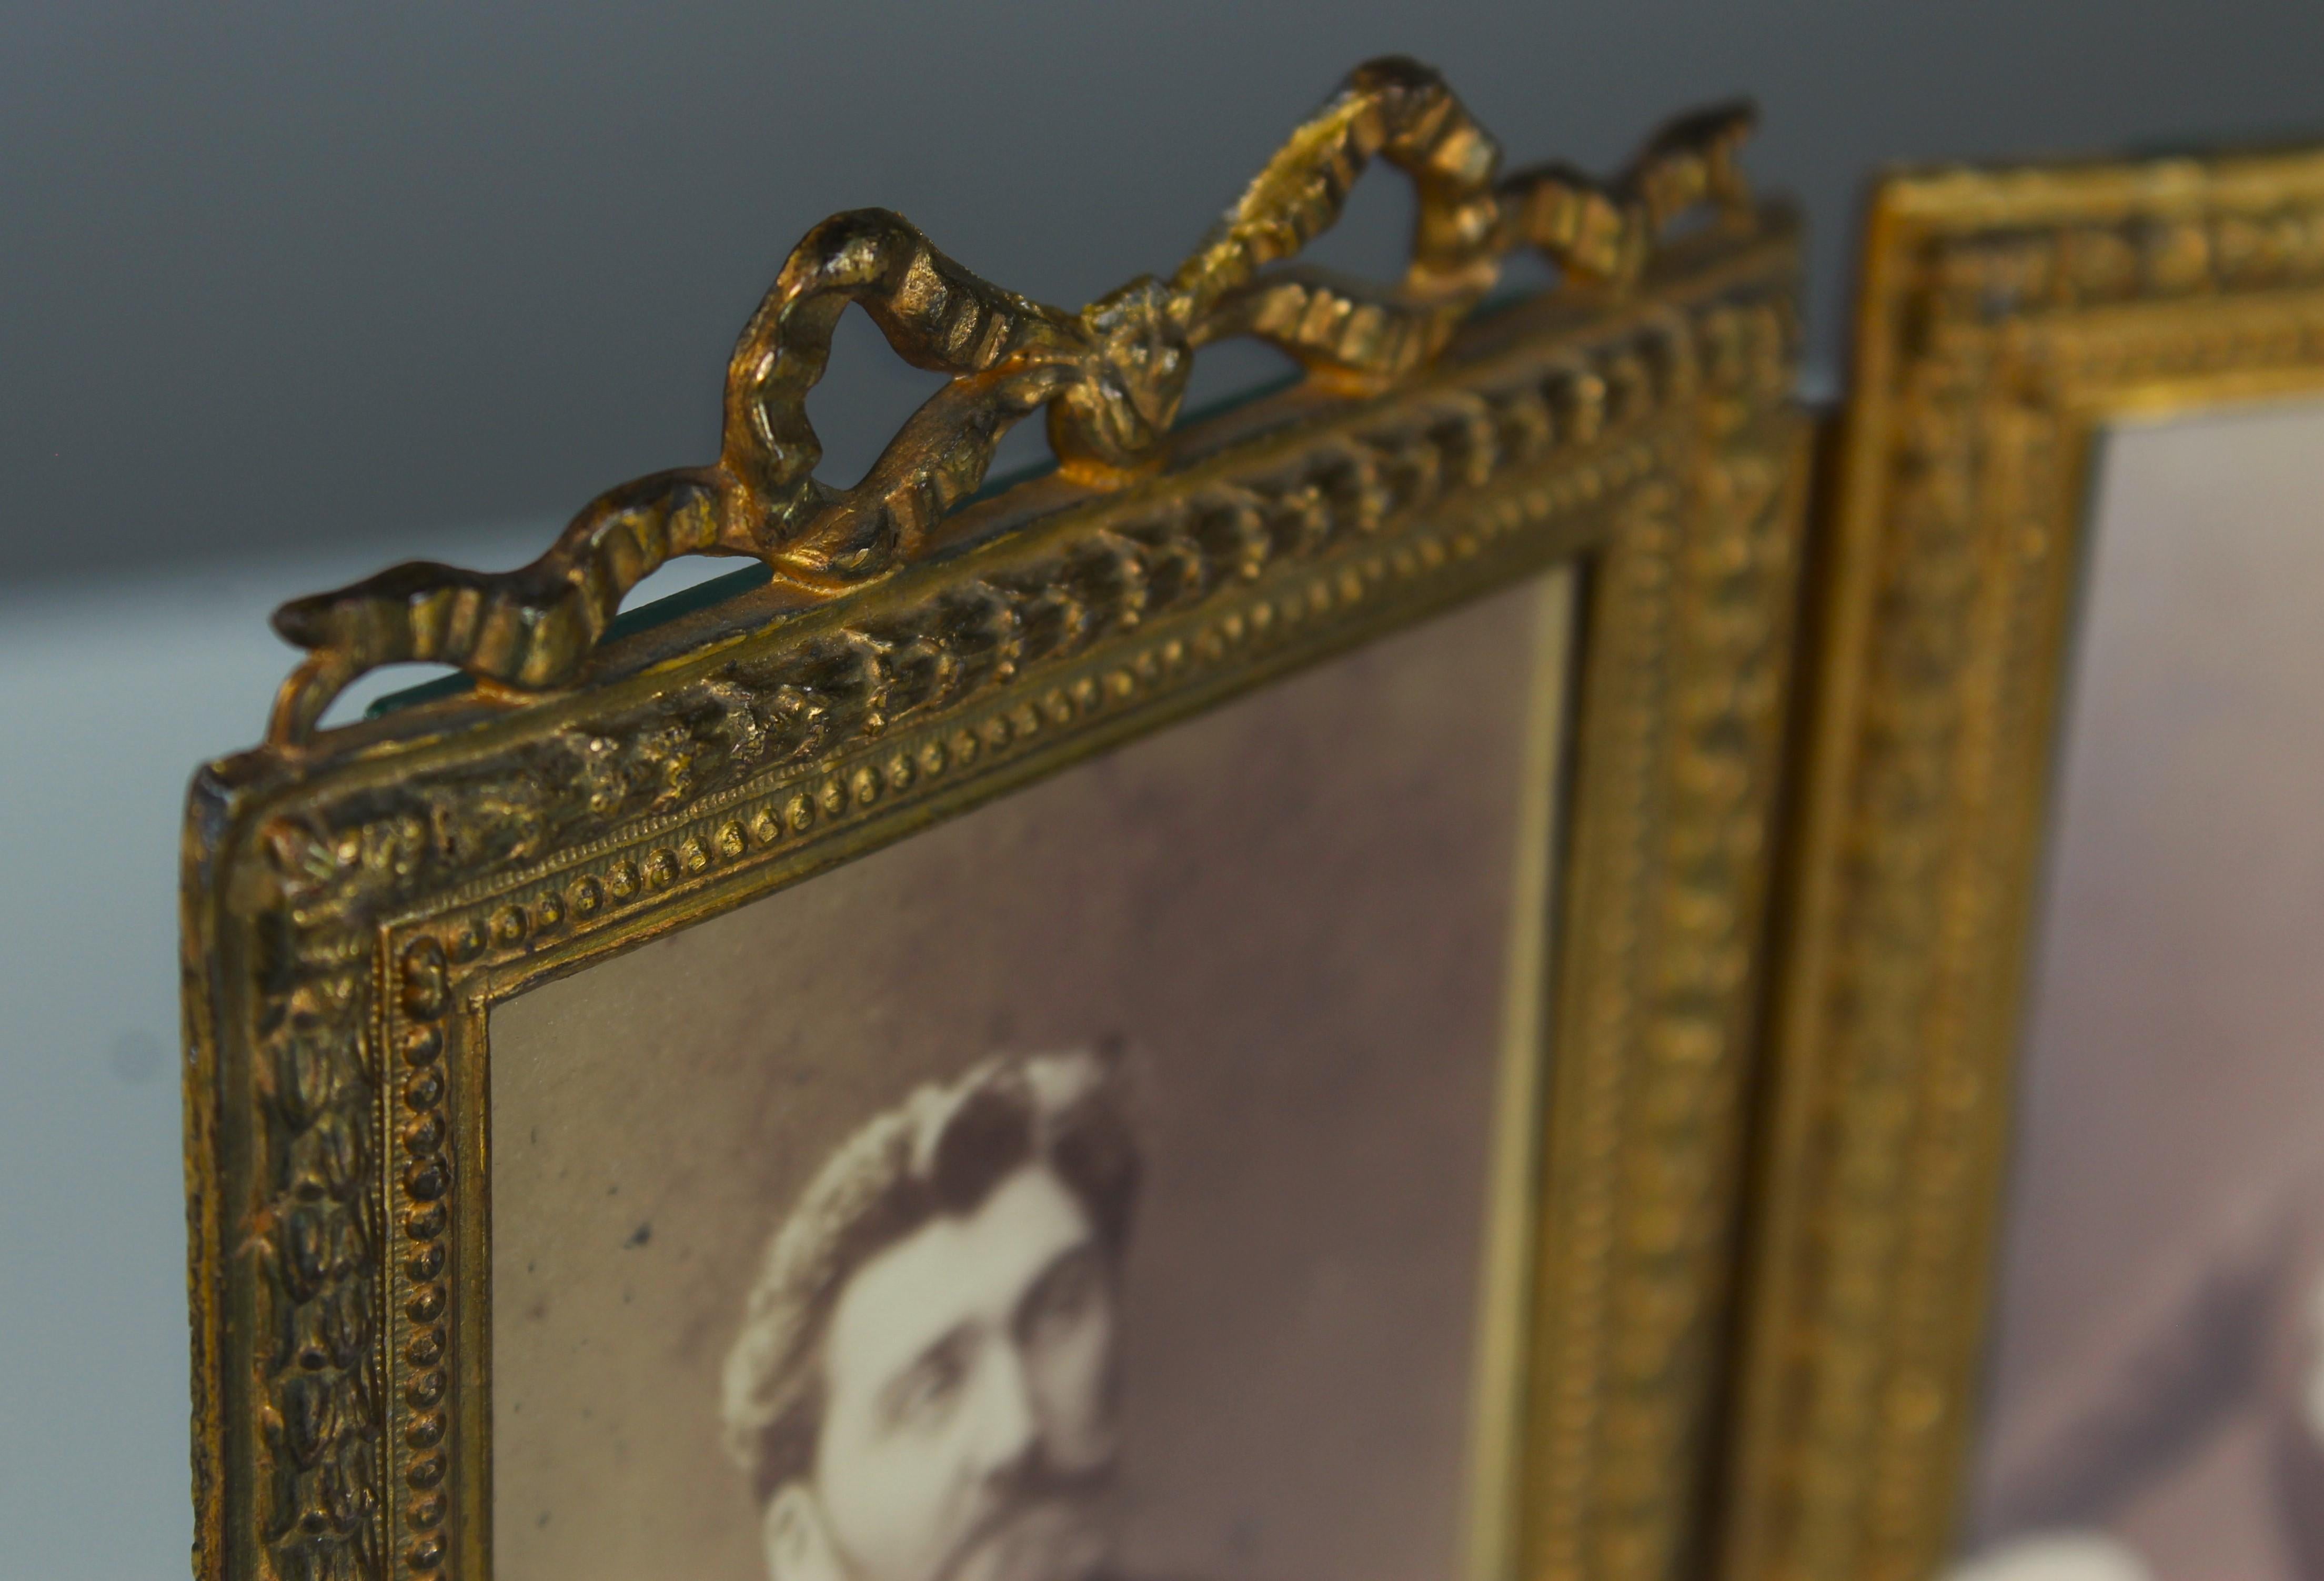 Beautiful antique picture frame from France, circa 1880.
Three pictures can be insert with each 9 x 6 cm.
Nicely cleaned condition with normal signs of age-related use.

